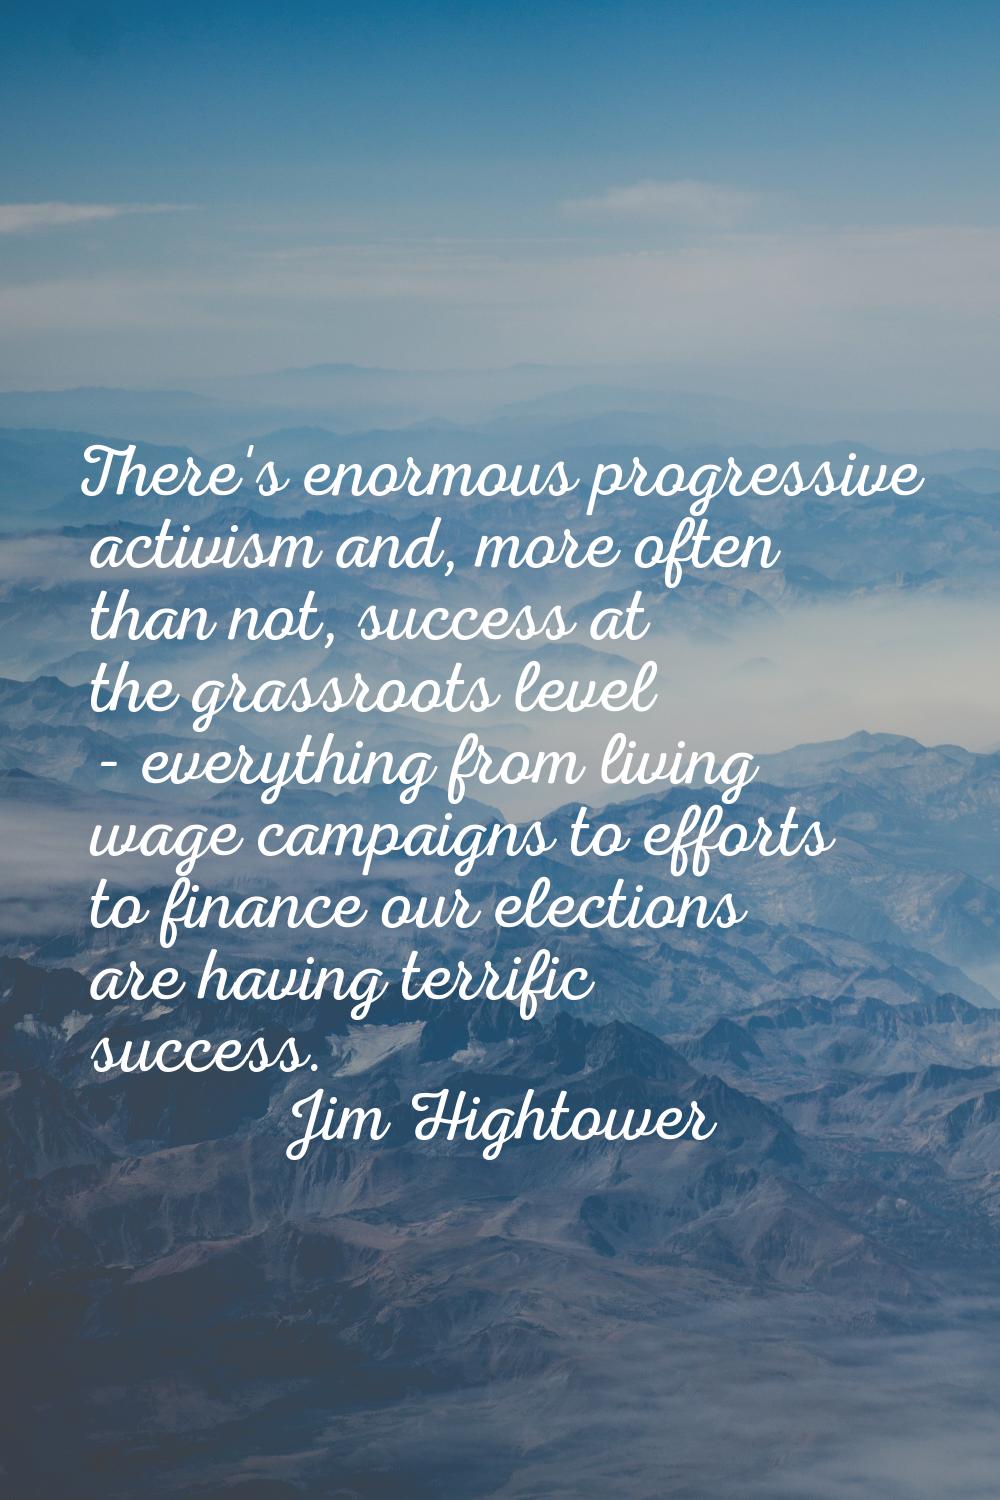 There's enormous progressive activism and, more often than not, success at the grassroots level - e